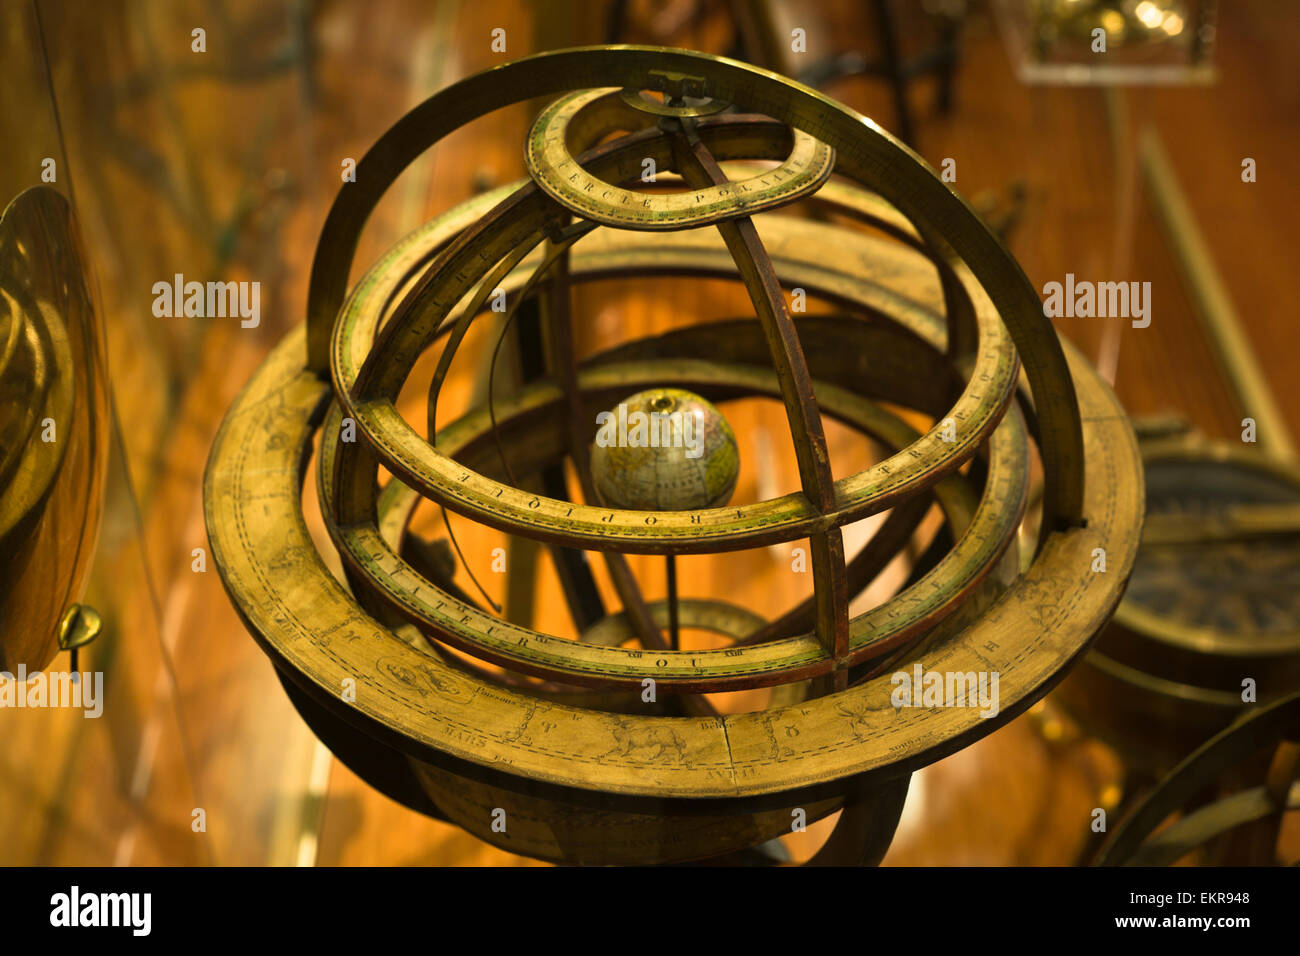 Antique brass armillary sphere on a wooden stand Stock Photo